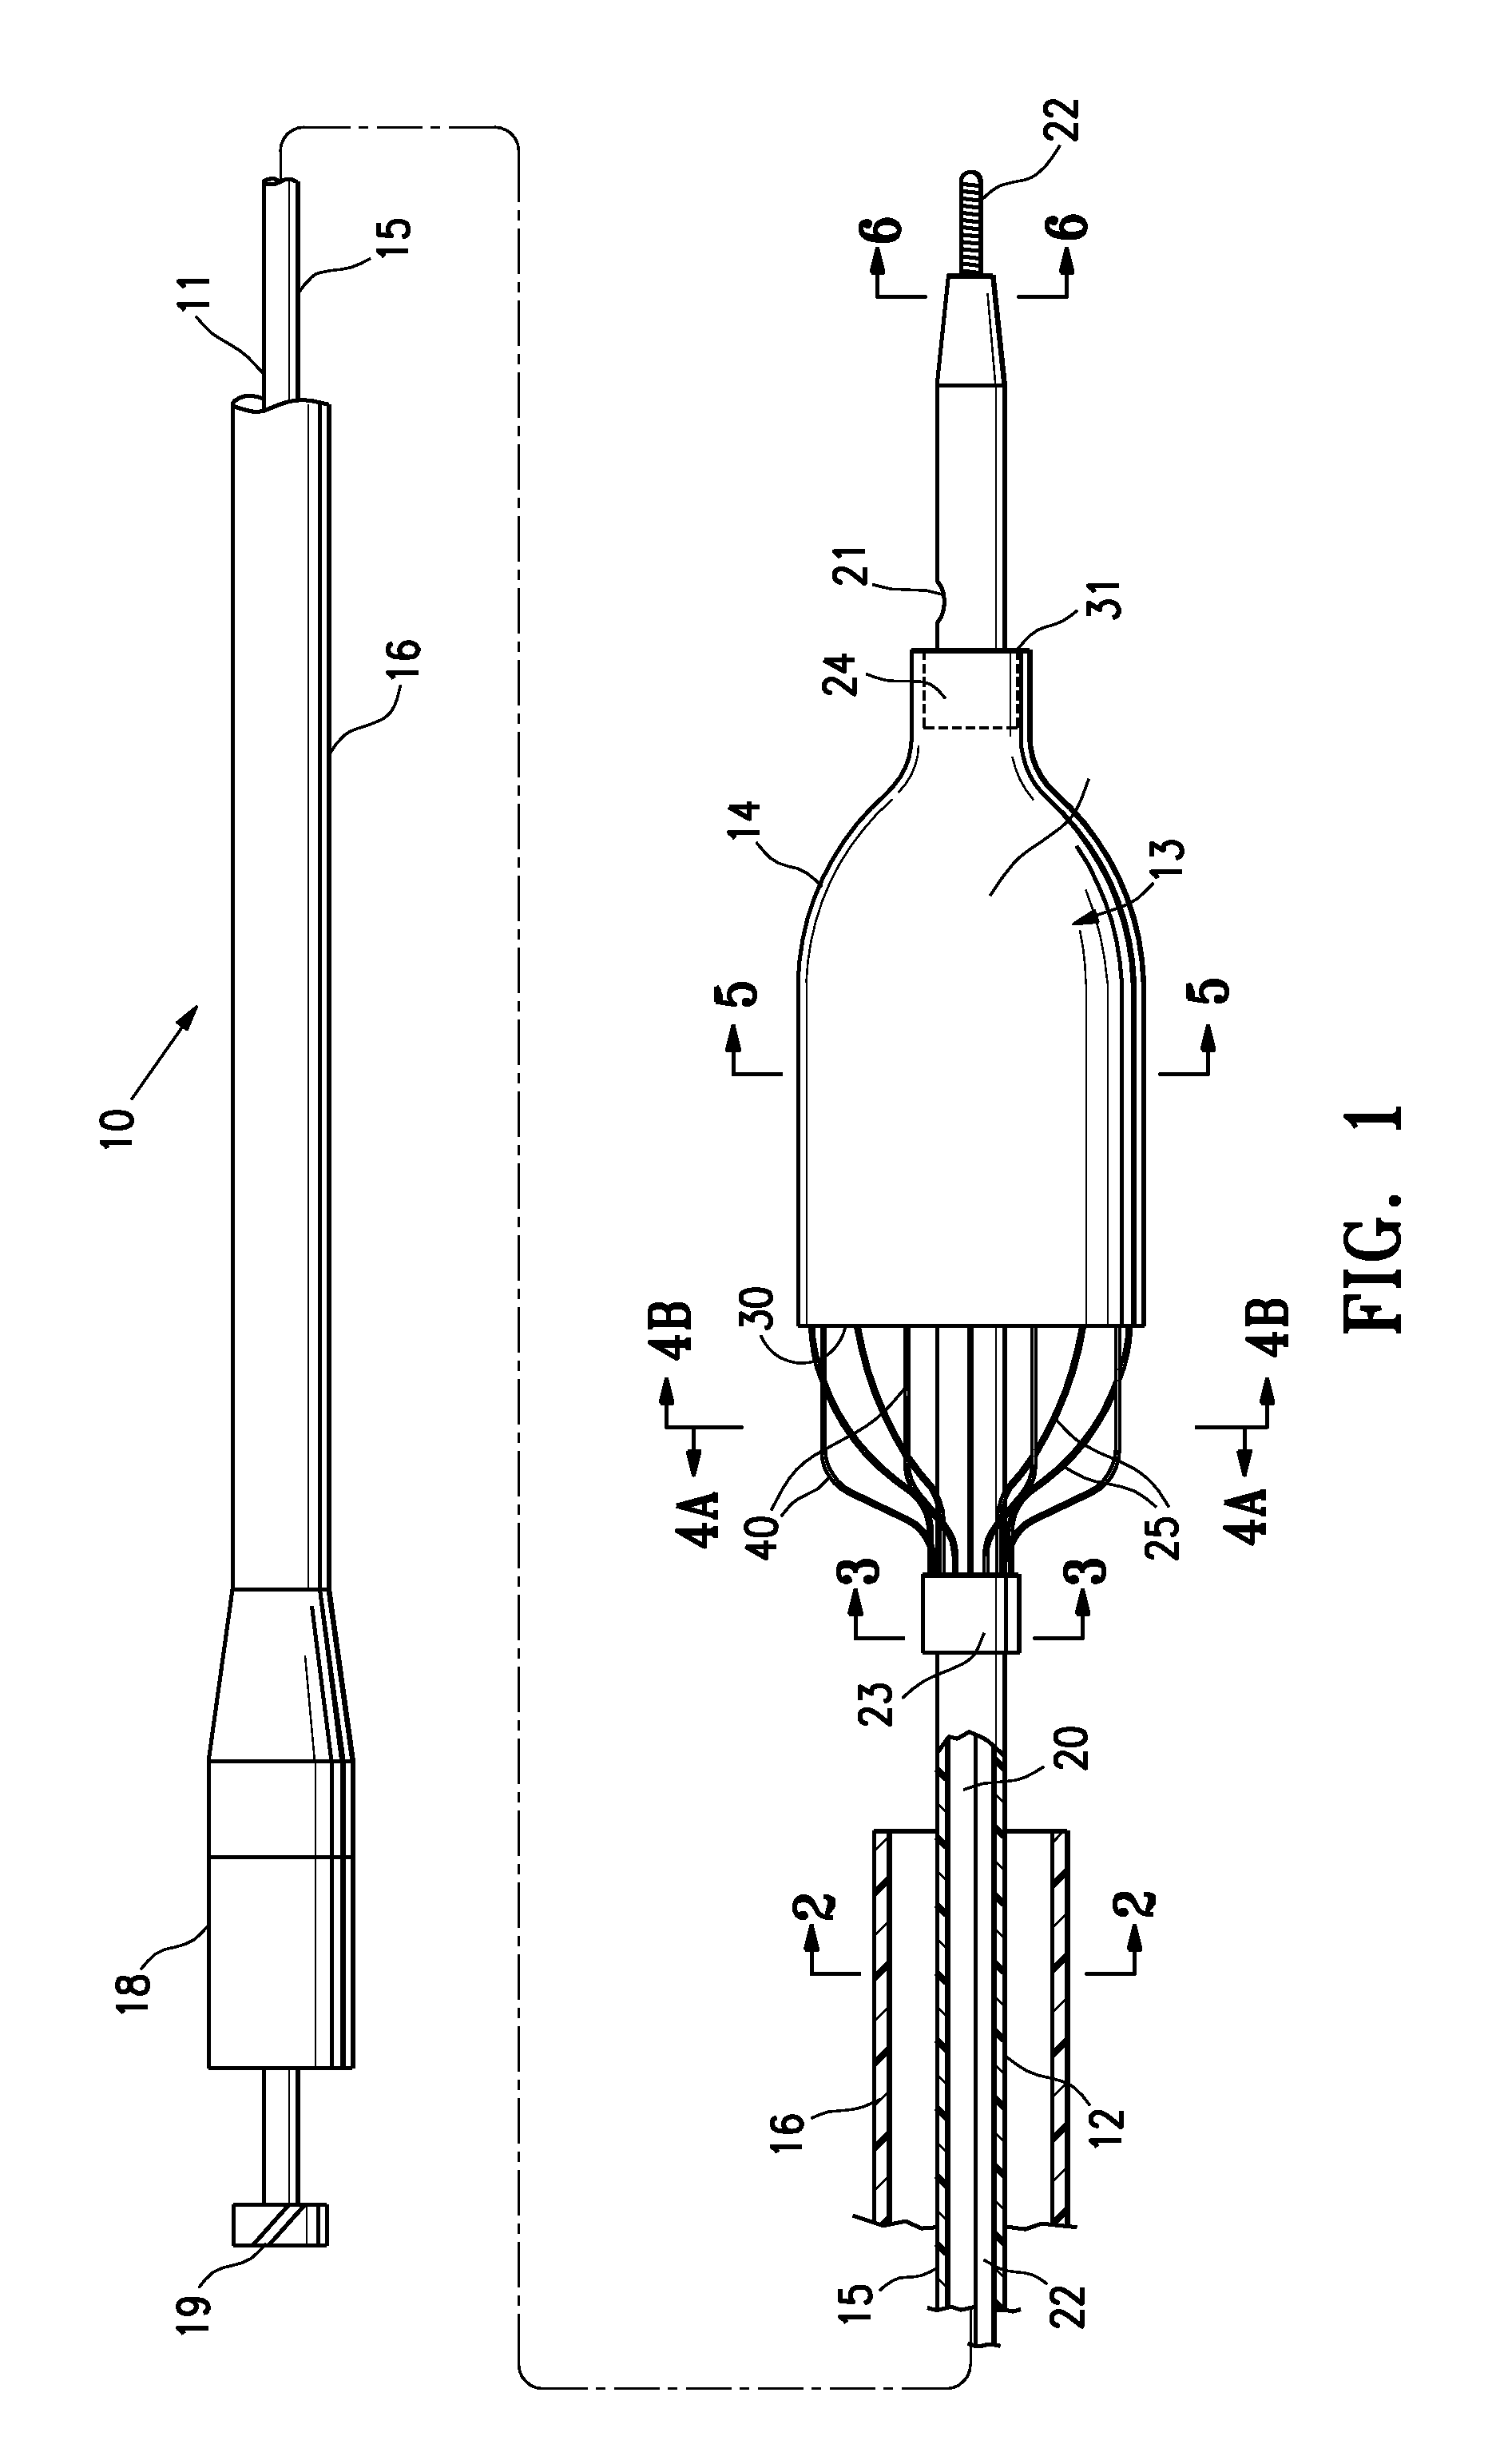 Intravascular medical device having a readily collapsible covered frame